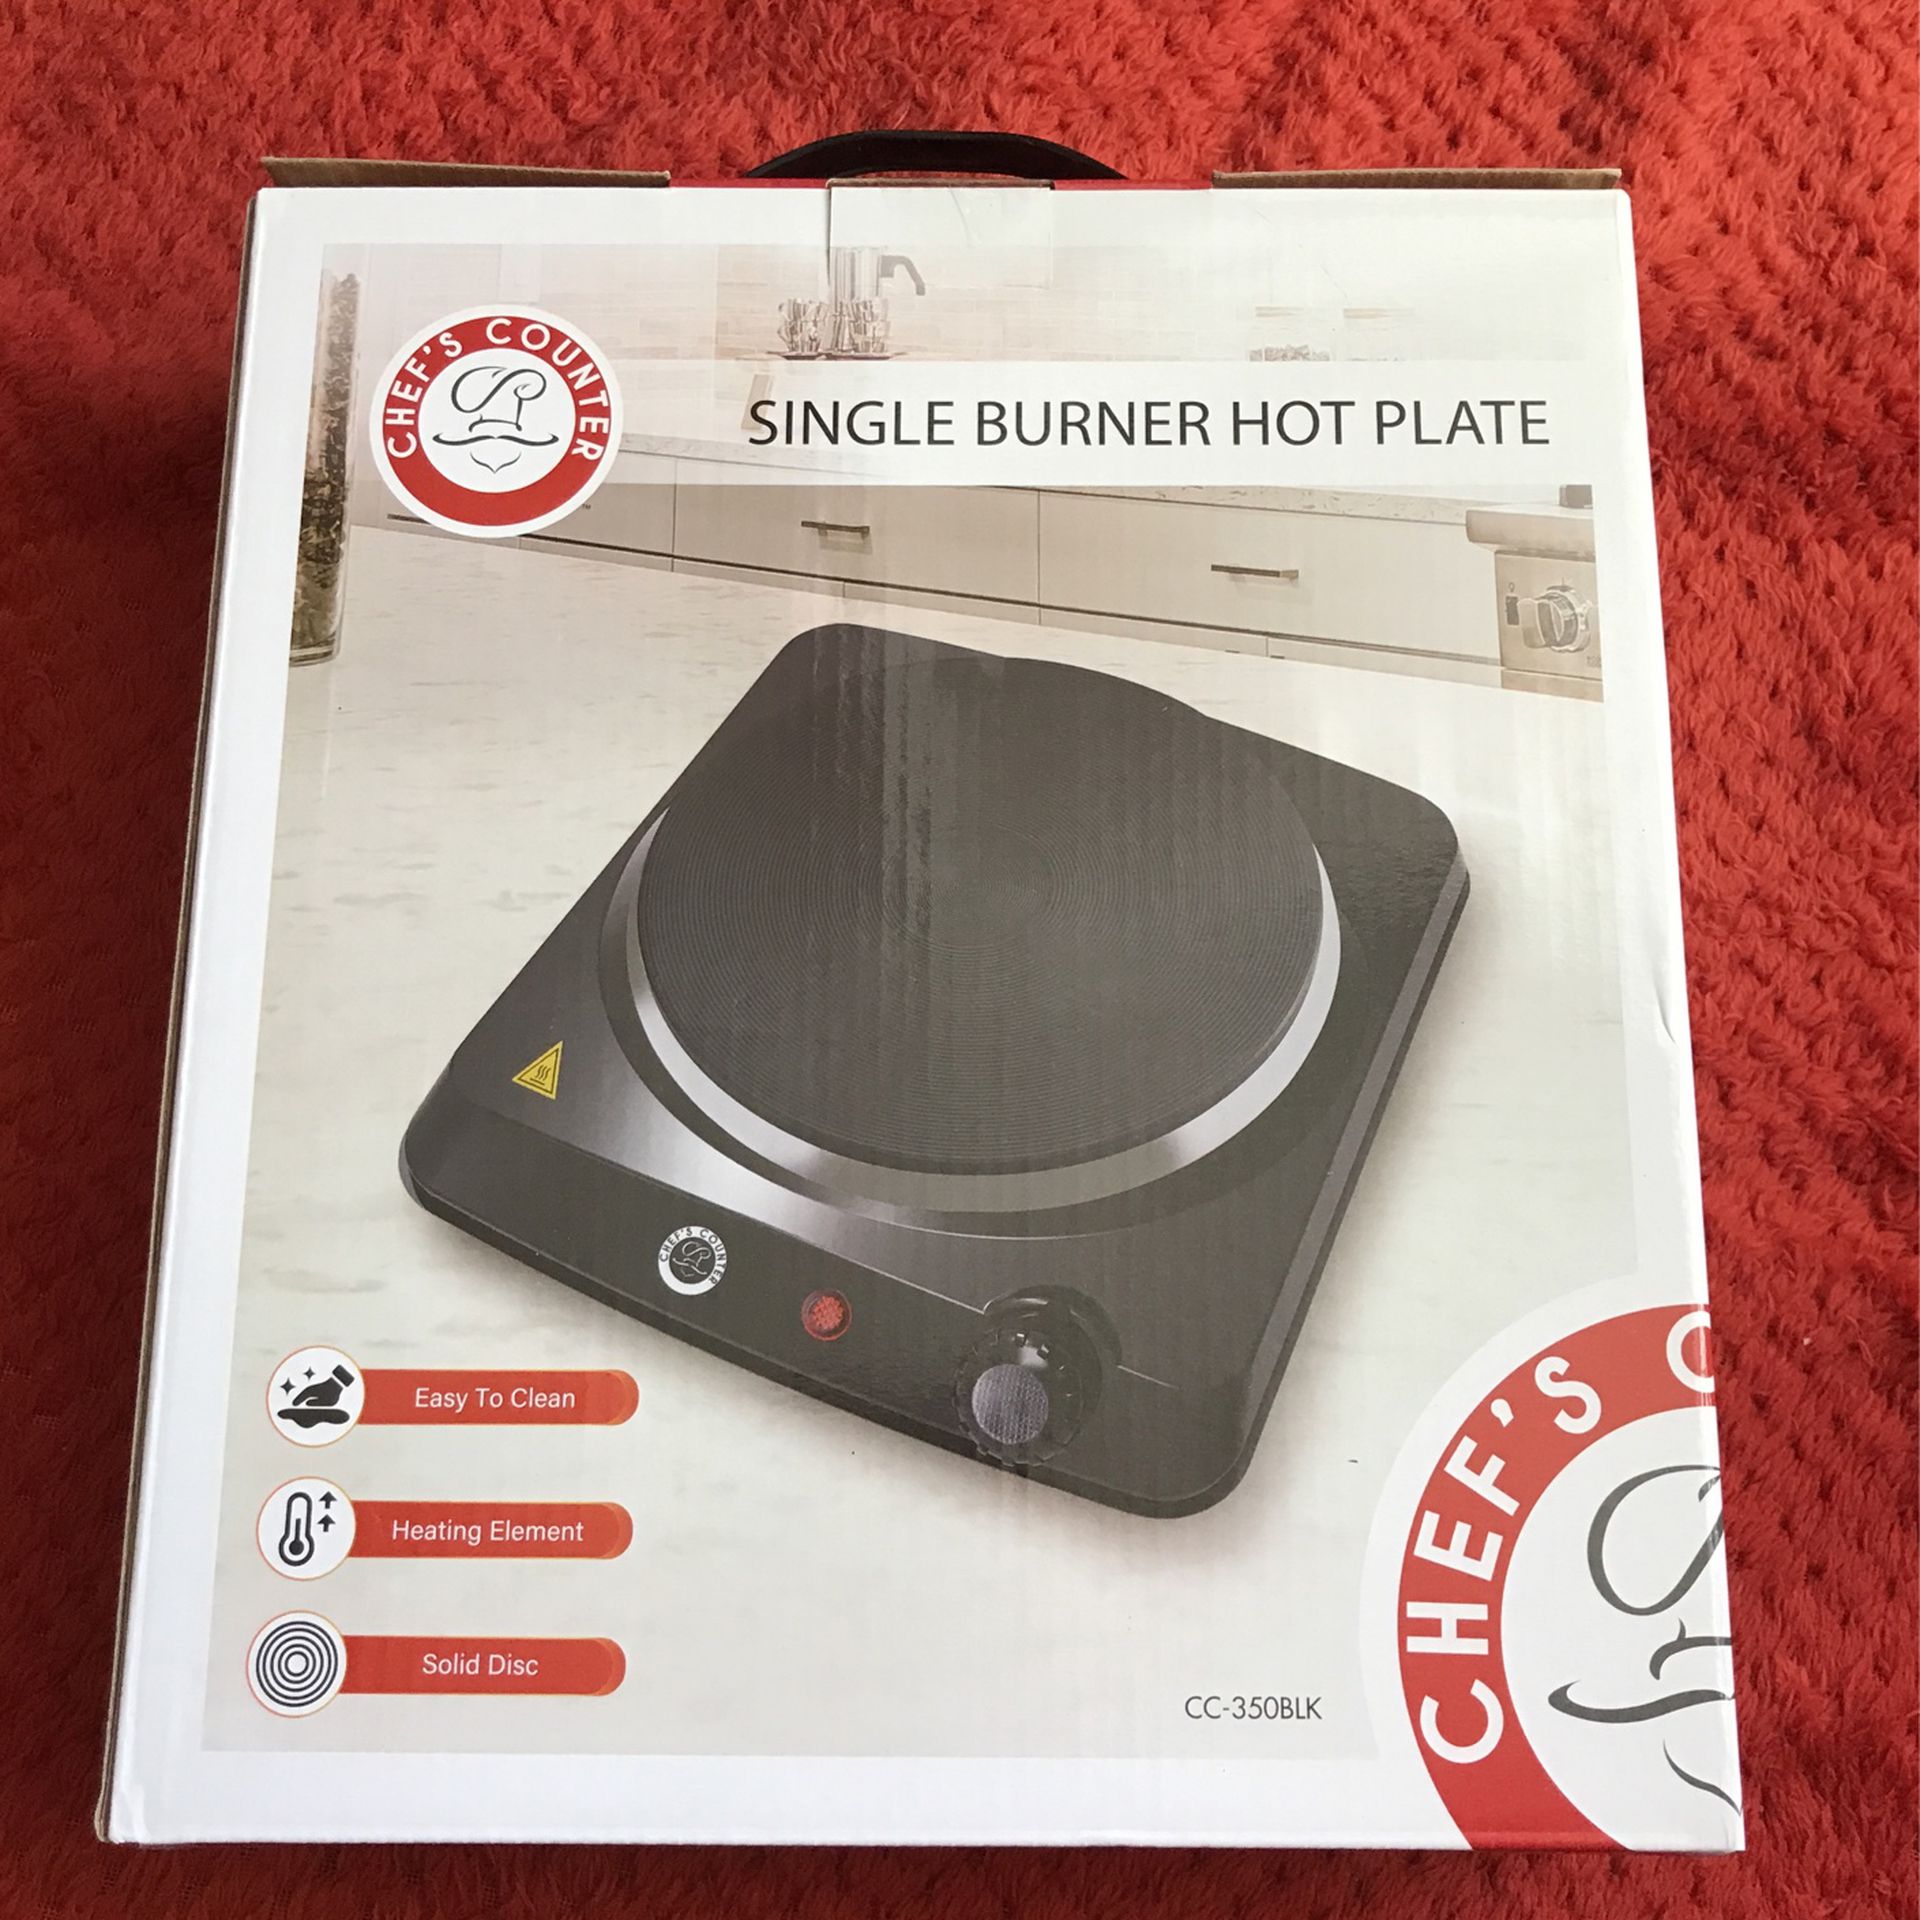 Chef’s Counter Single Burner Hot Plate